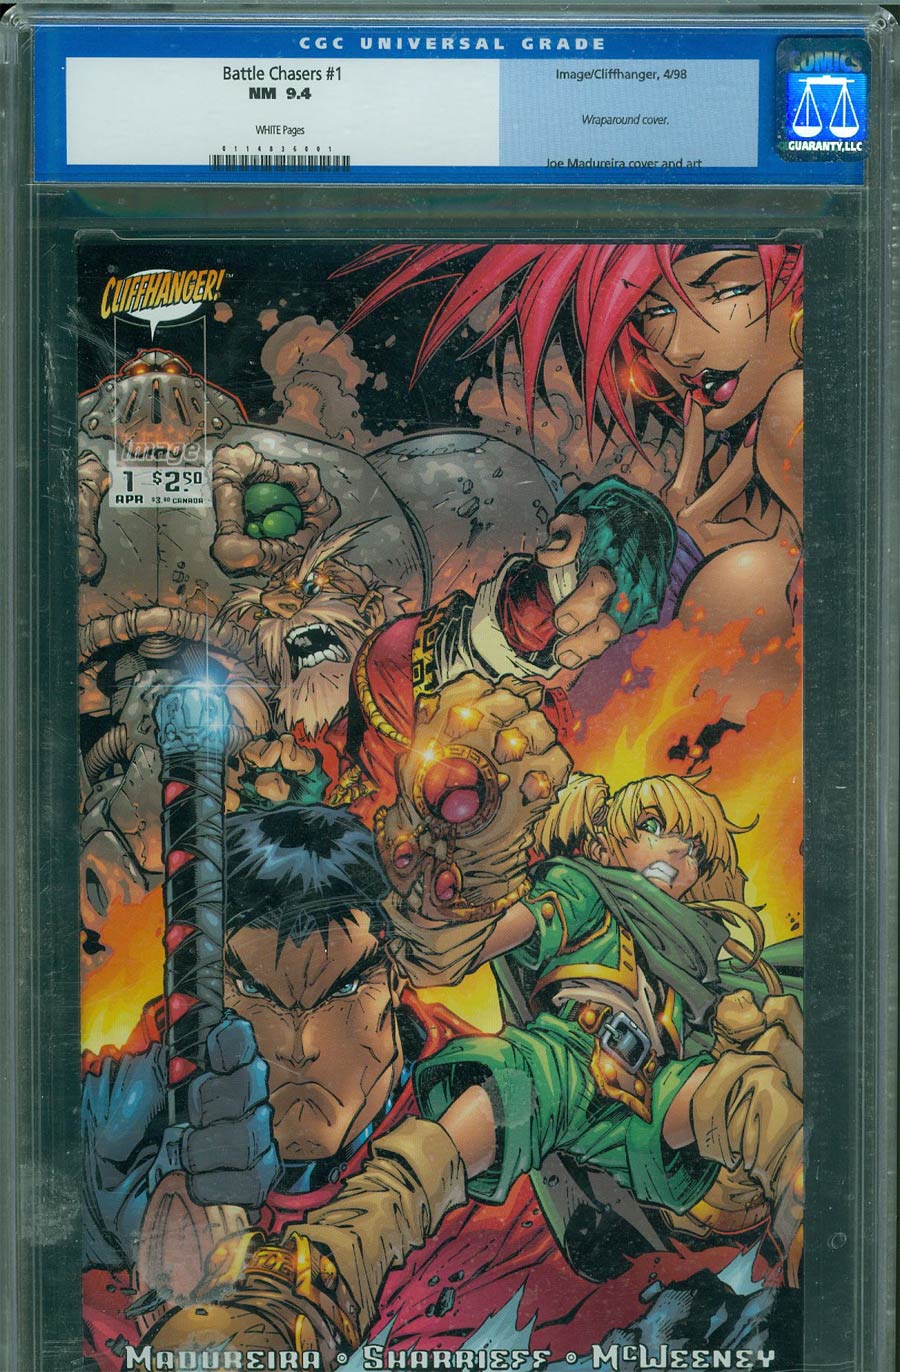 Battle Chasers #1 Cover G CGC 9.4